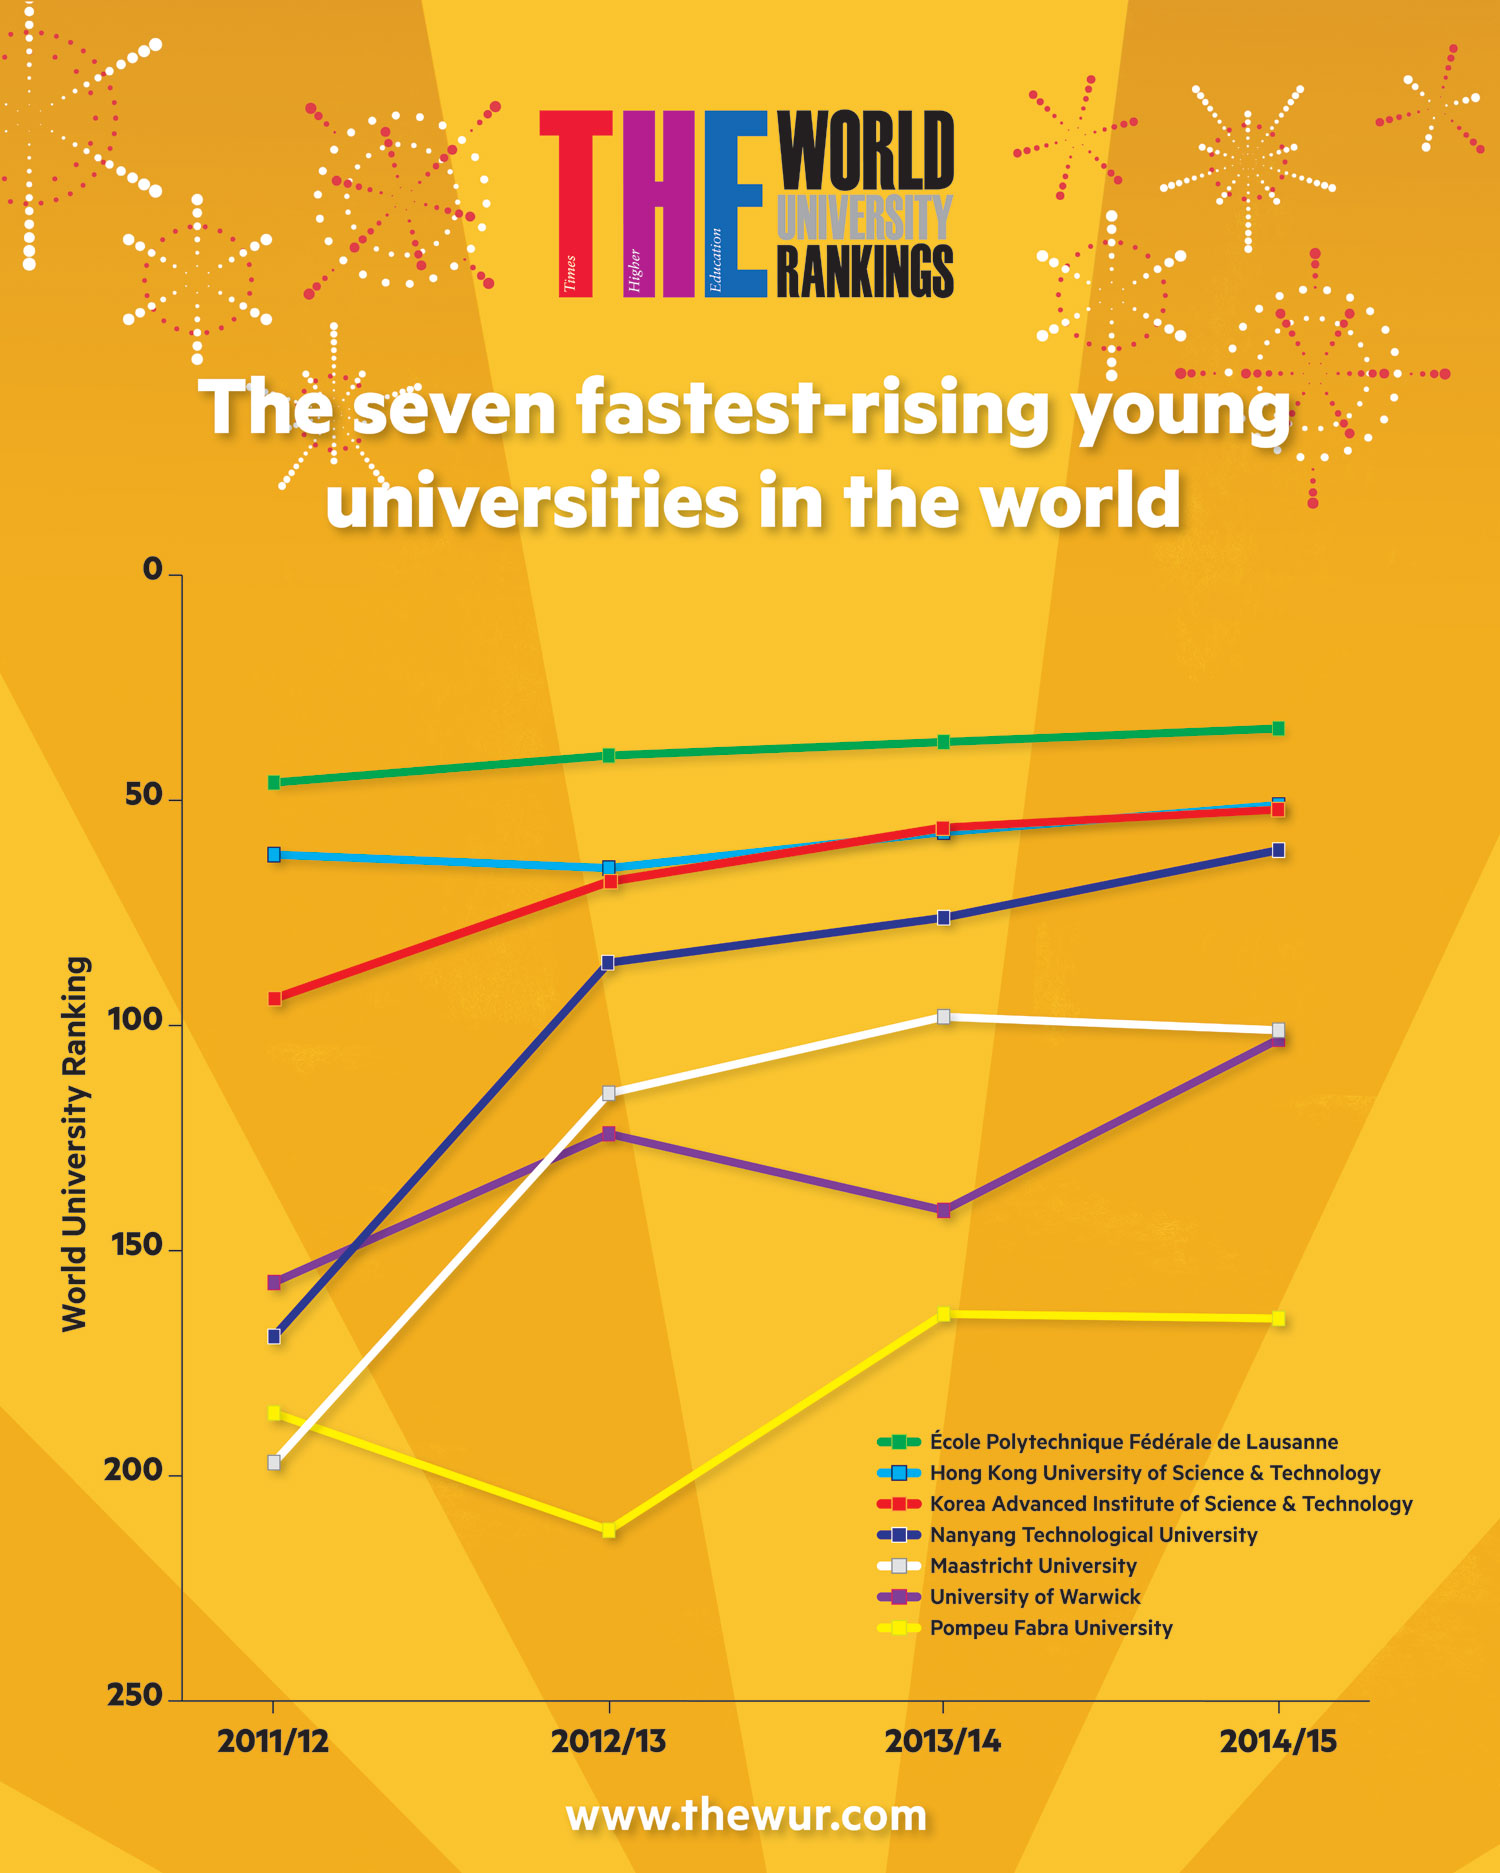 worlds-fastest-rising-young-universities-infographic-large